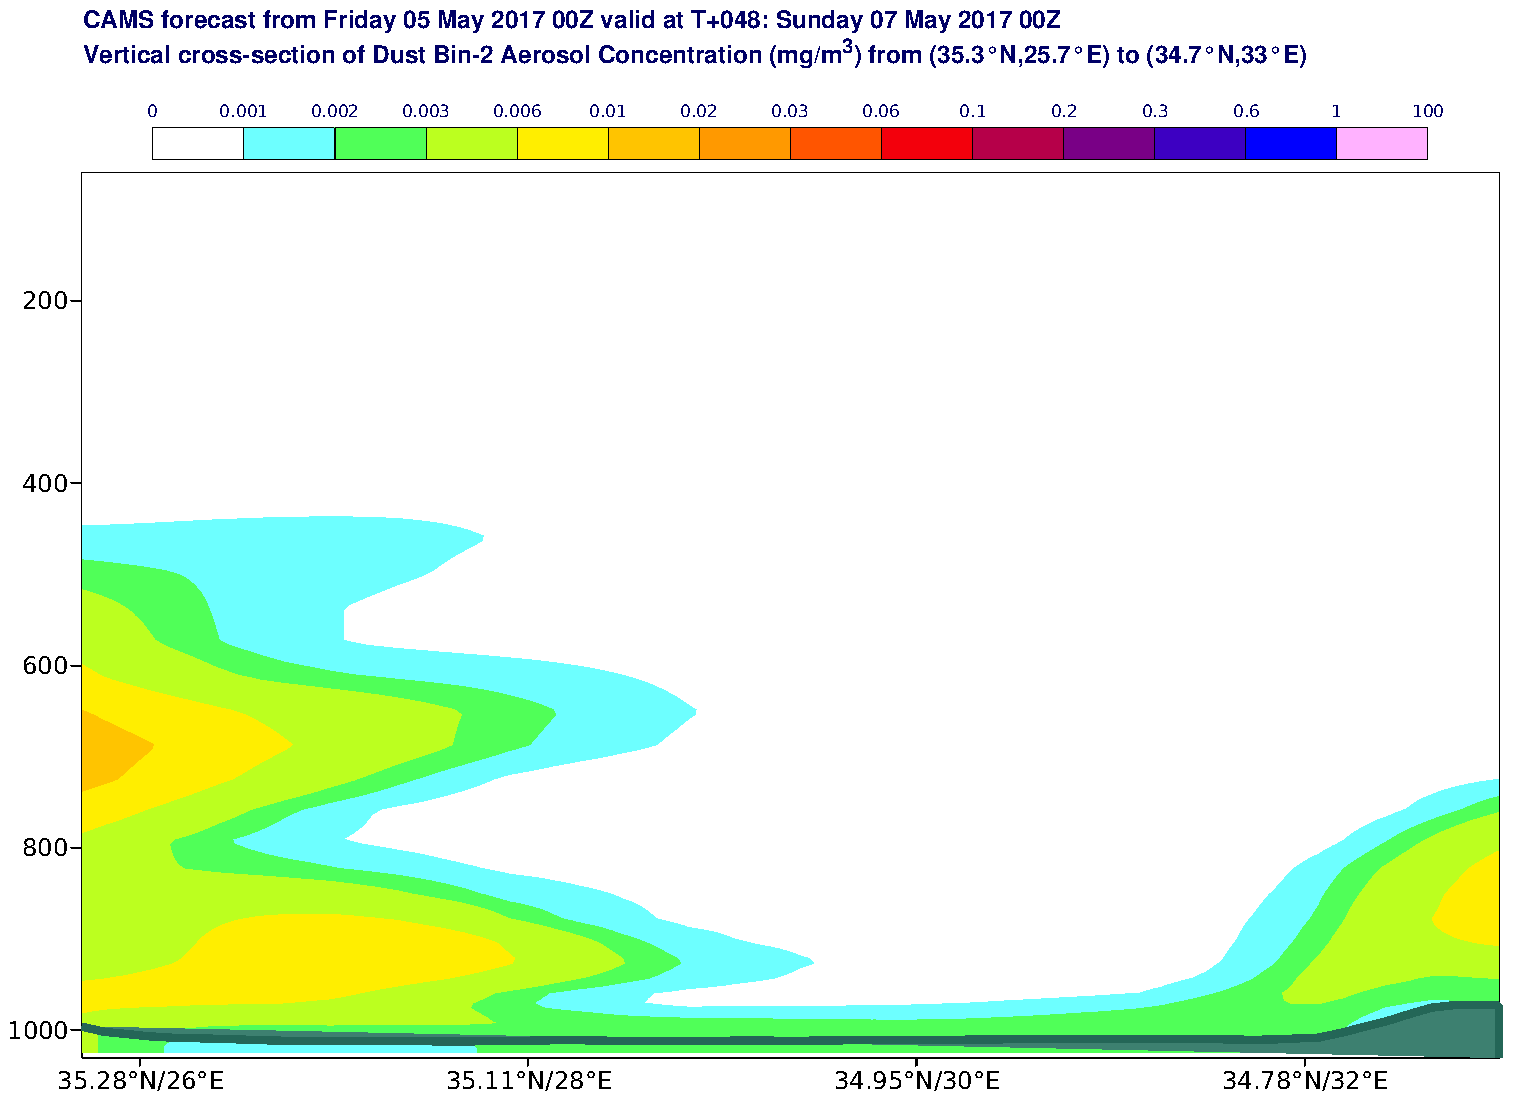 Vertical cross-section of Dust Bin-2 Aerosol Concentration (mg/m3) valid at T48 - 2017-05-07 00:00